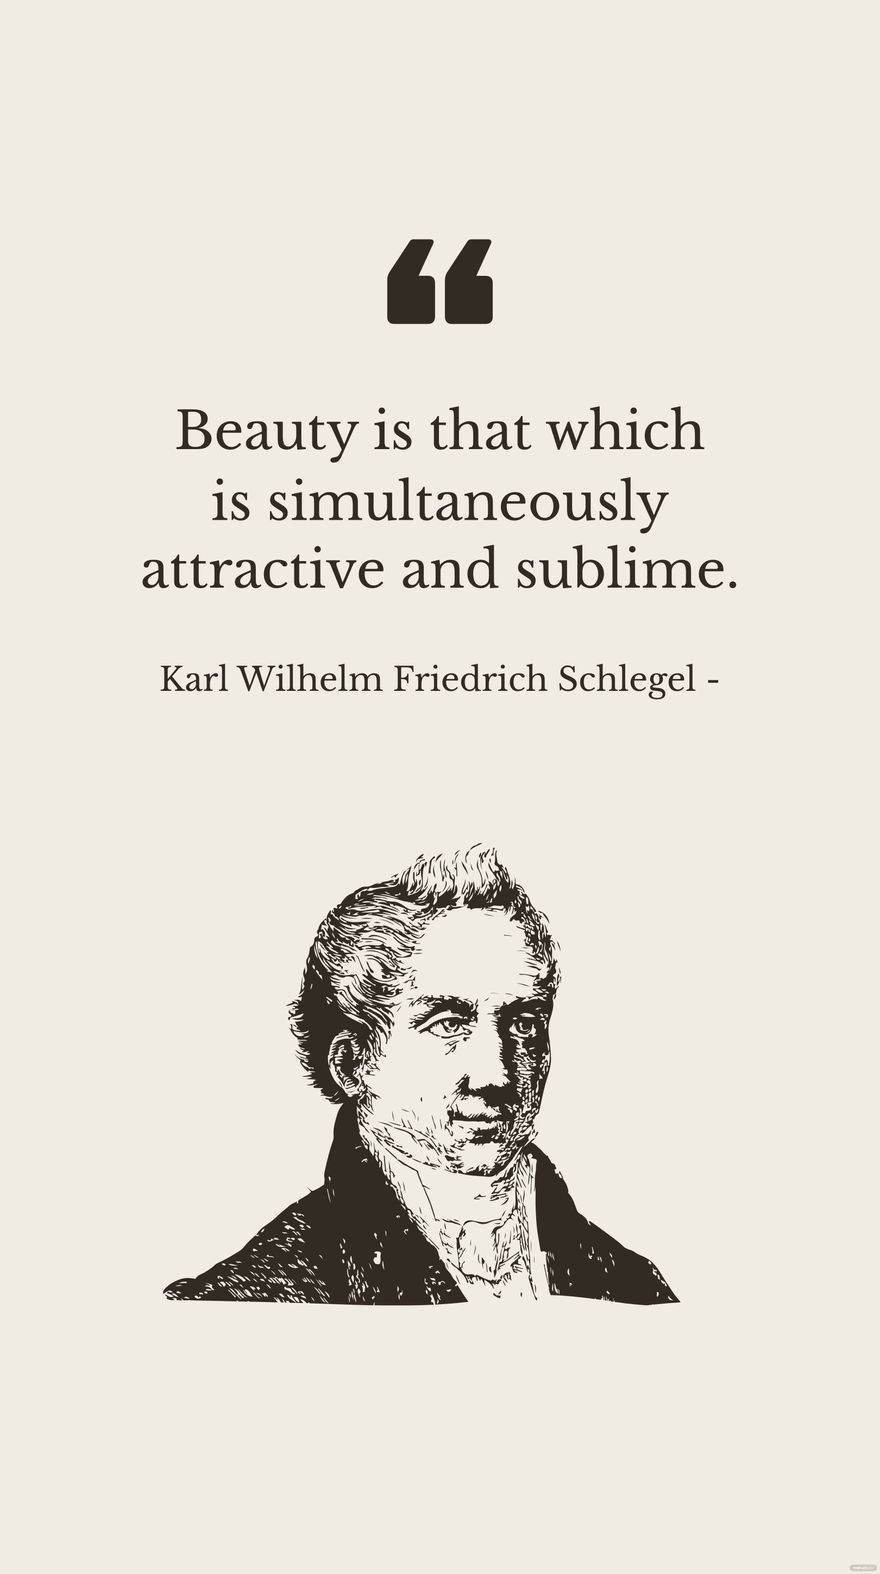 Karl Wilhelm Friedrich Schlegel - Beauty is that which is simultaneously attractive and sublime. in JPG